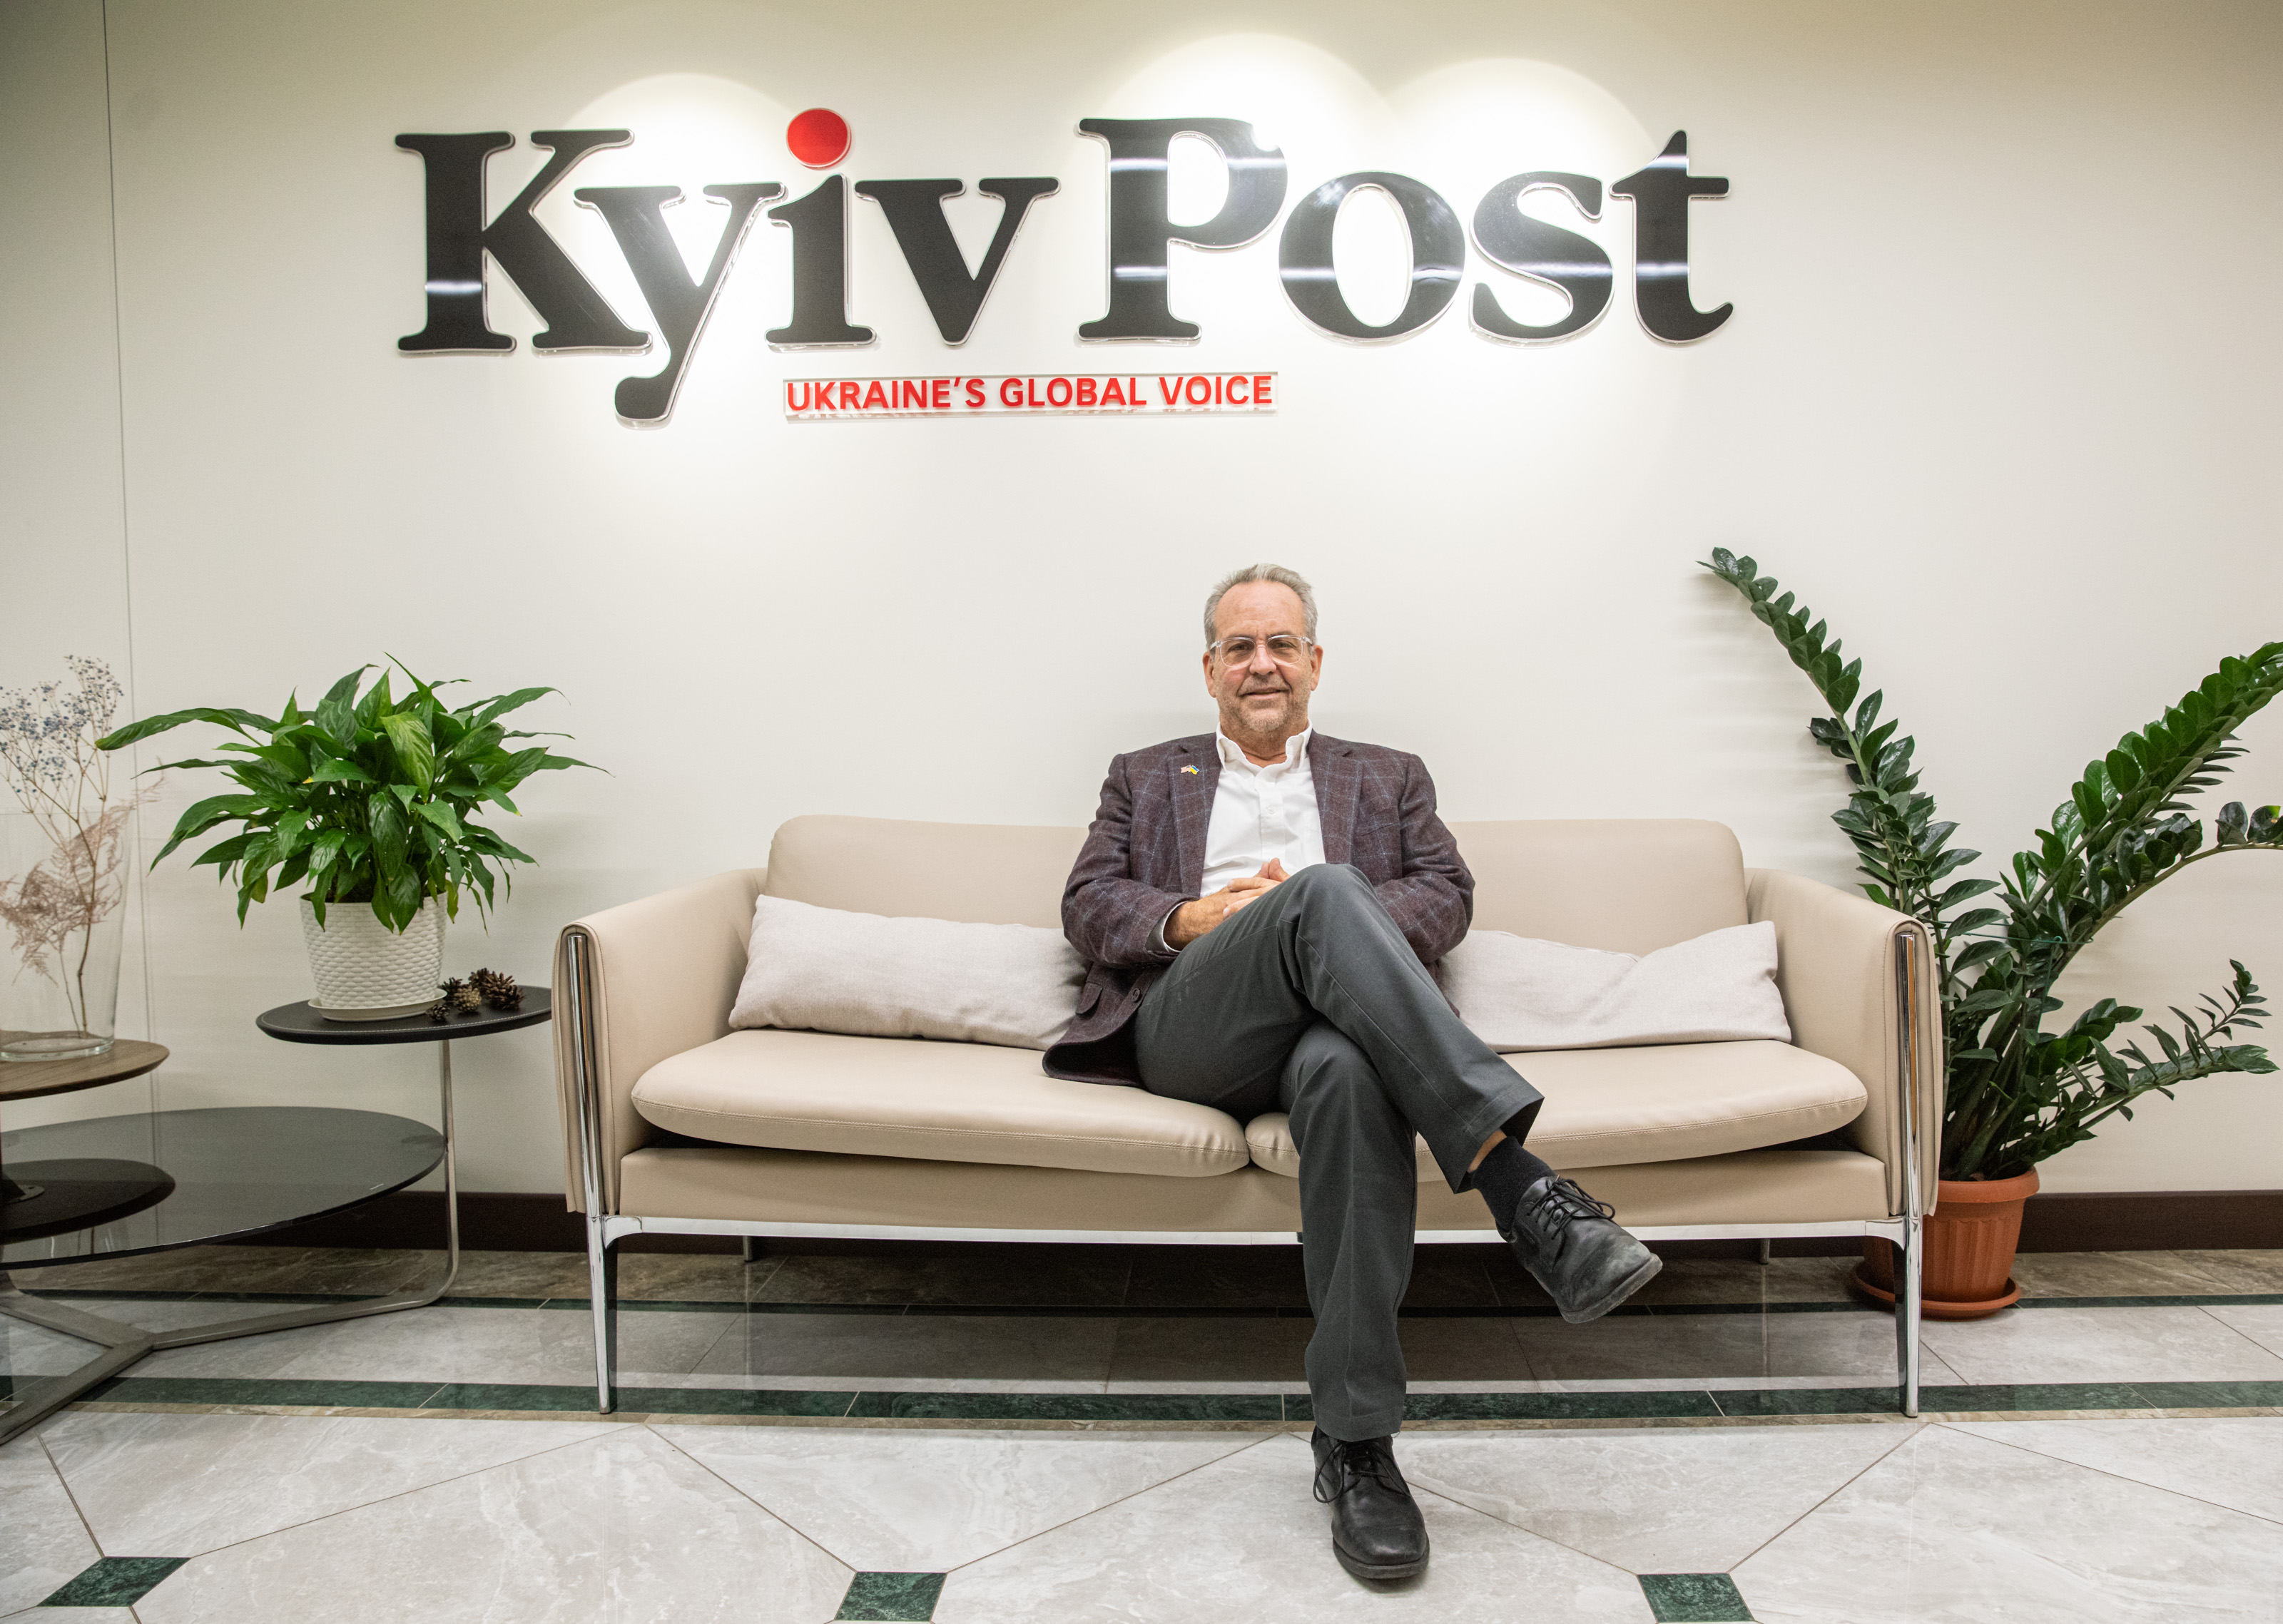 Q&A with Brian Bonner, ex-chief editor of Kyiv Post